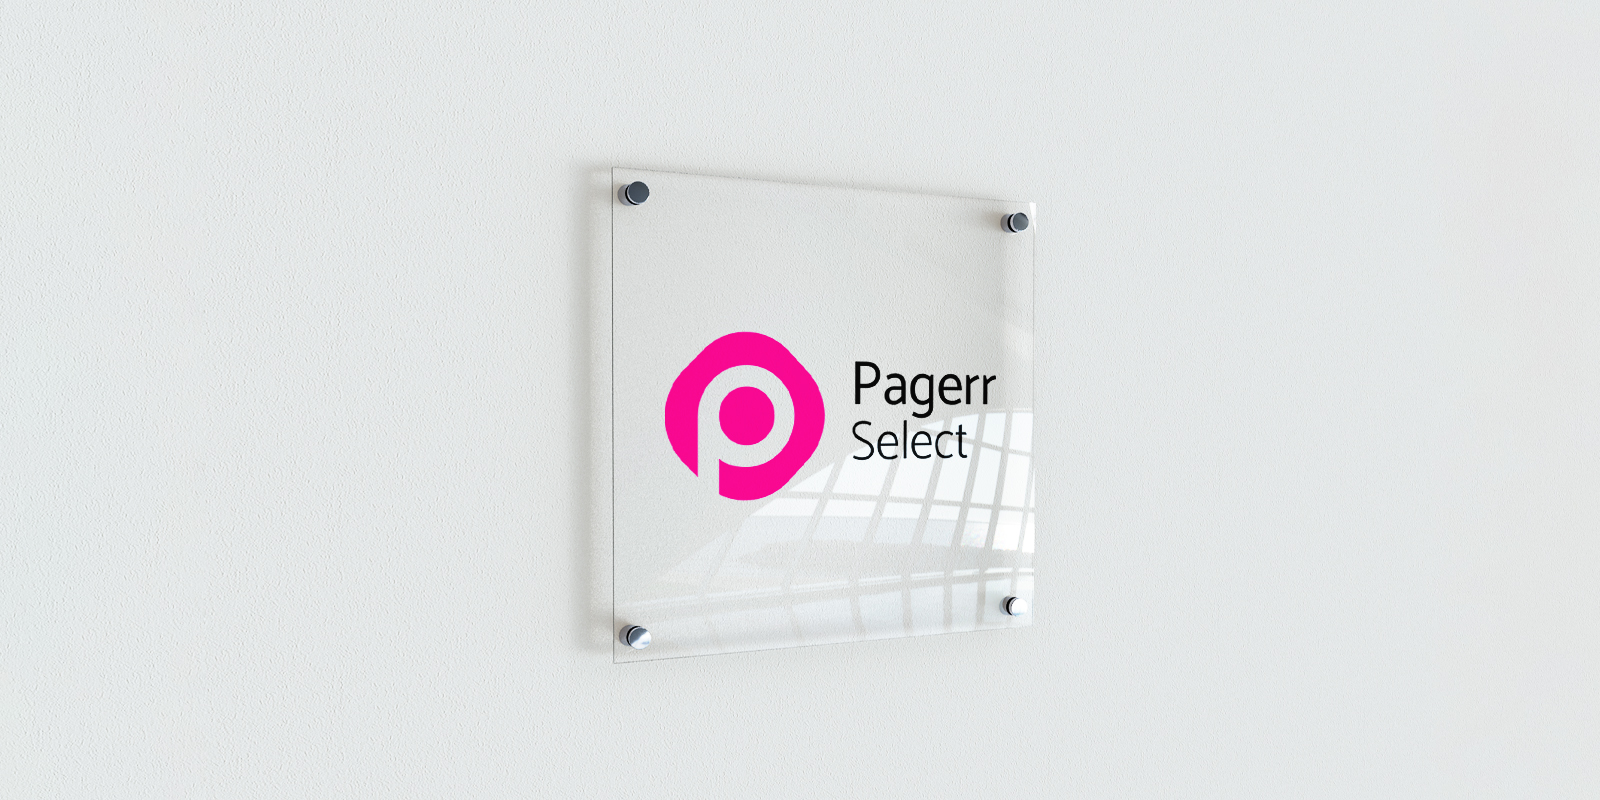 Acrylic signs in Ballarat - Print with Pagerr